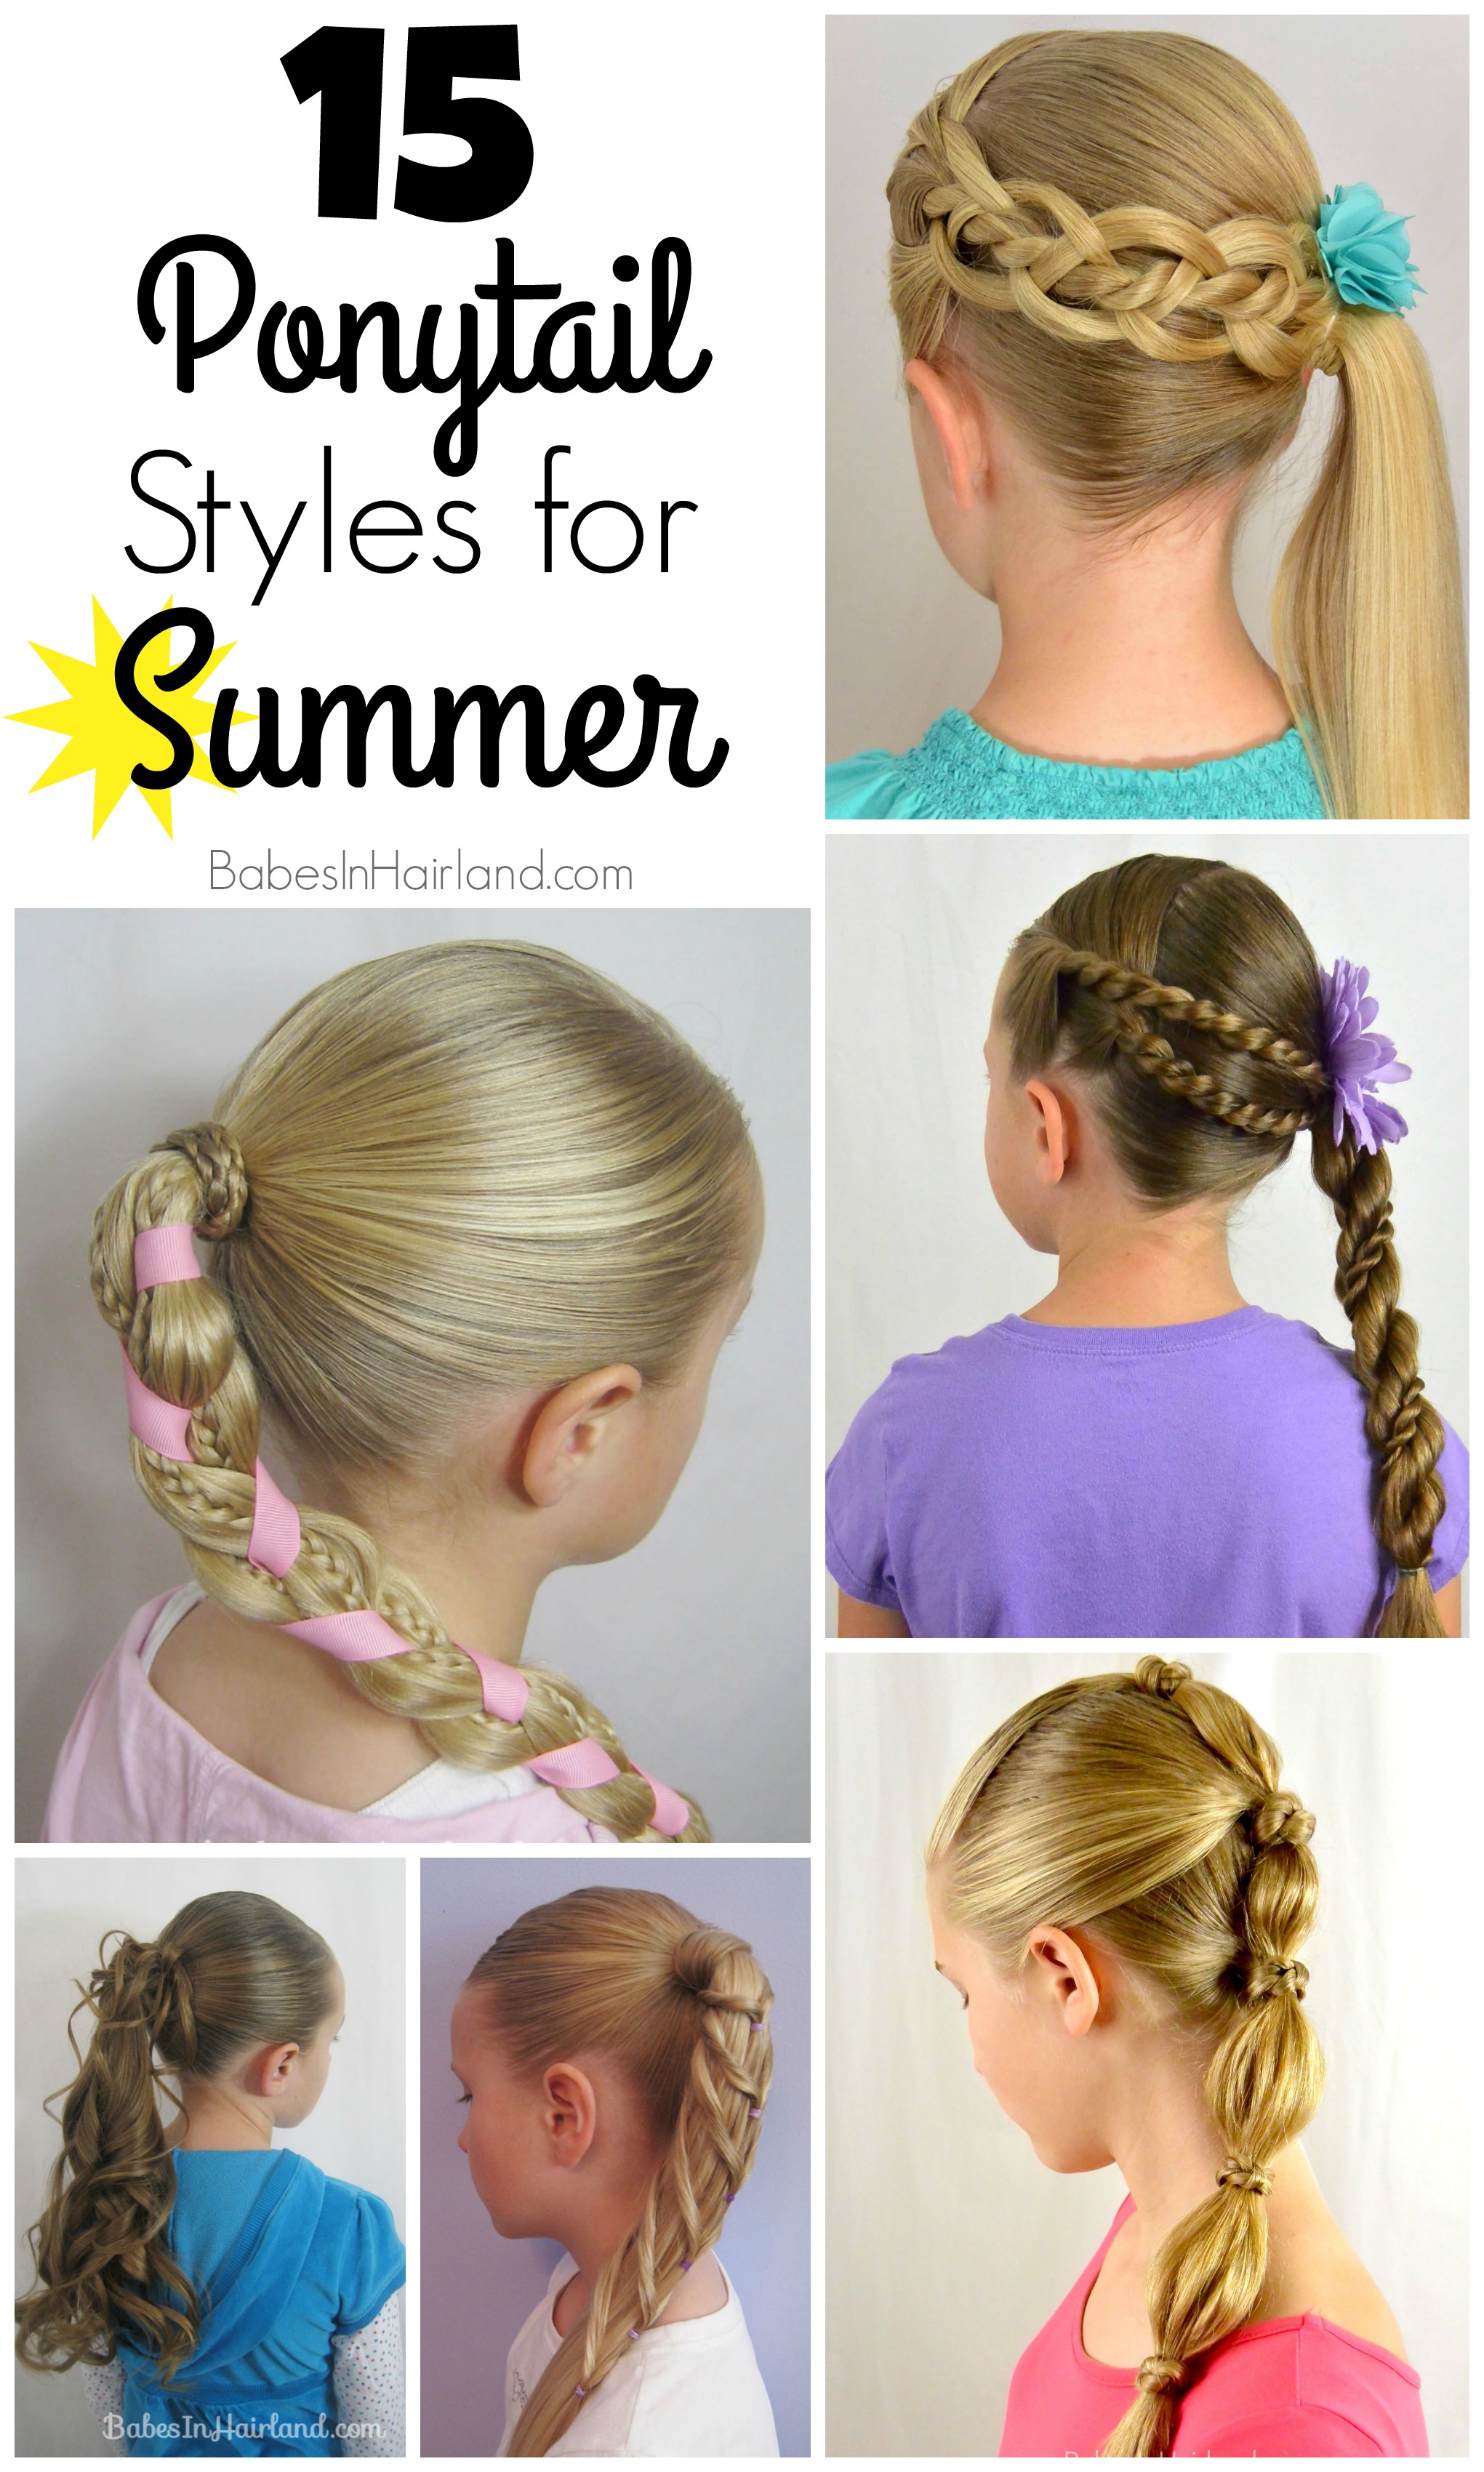 Summer and Sports Braided Hairstyle for all Your Outdoor Activities